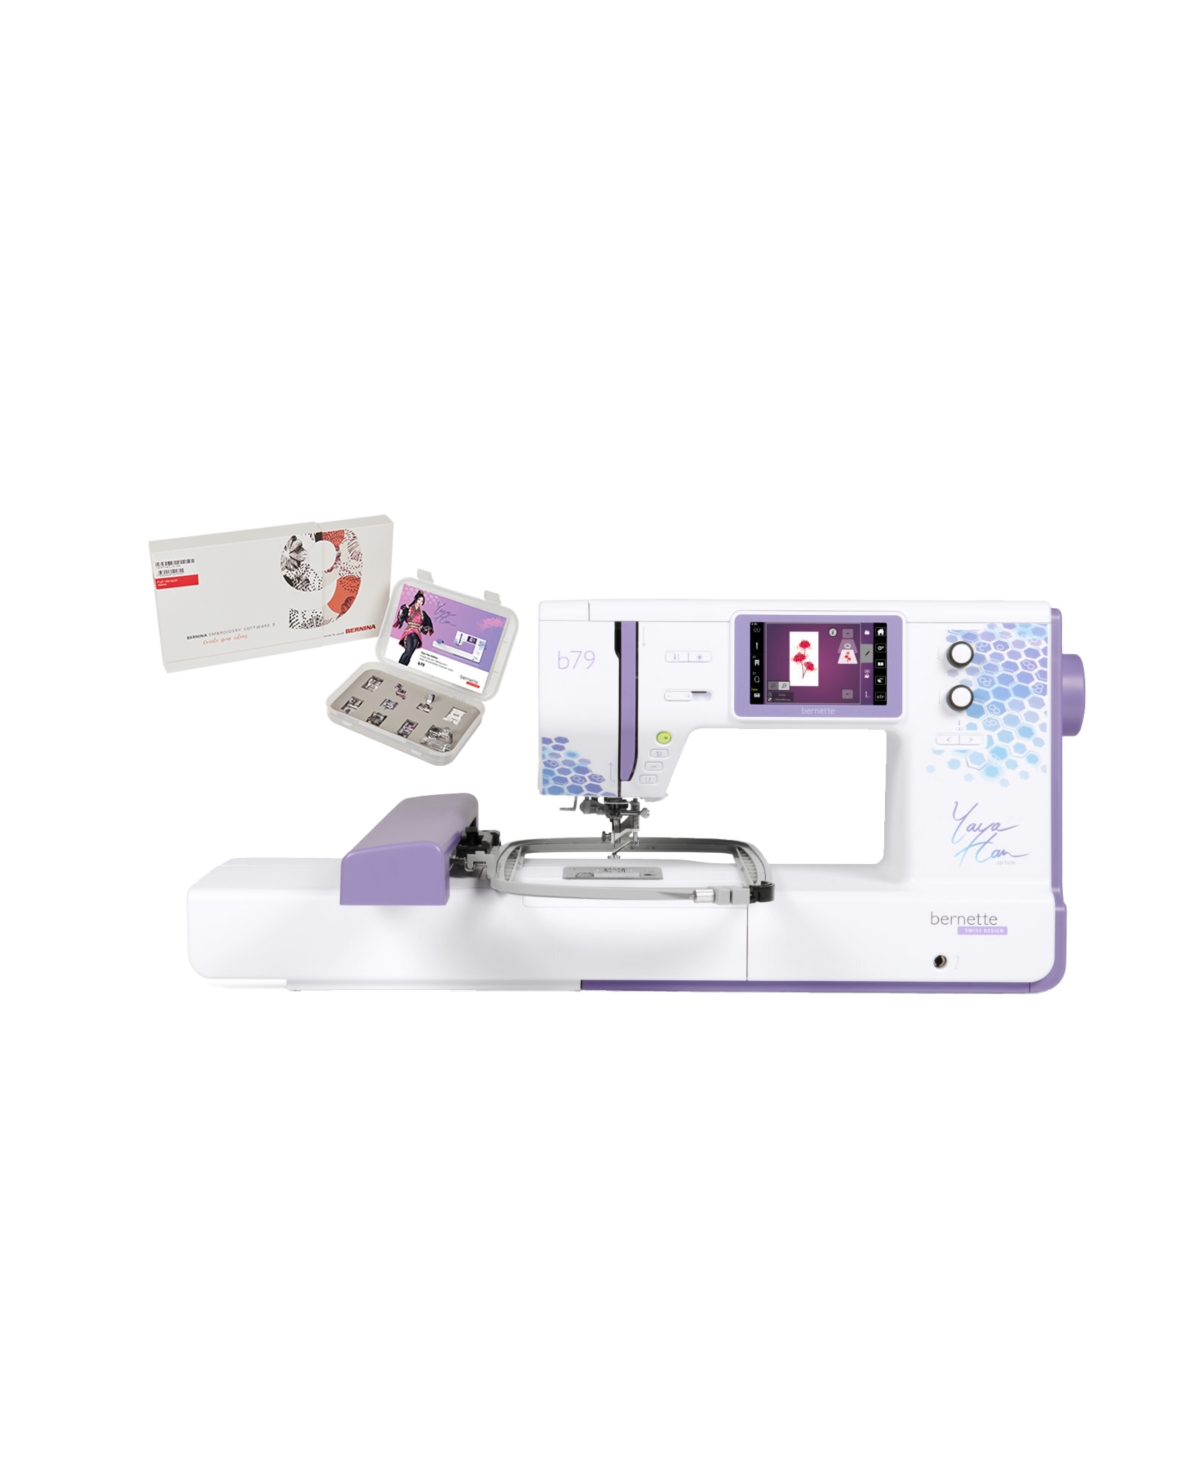 b79 Yaya Han Special Edition Computerized Sewing and Embroidery Machine - White